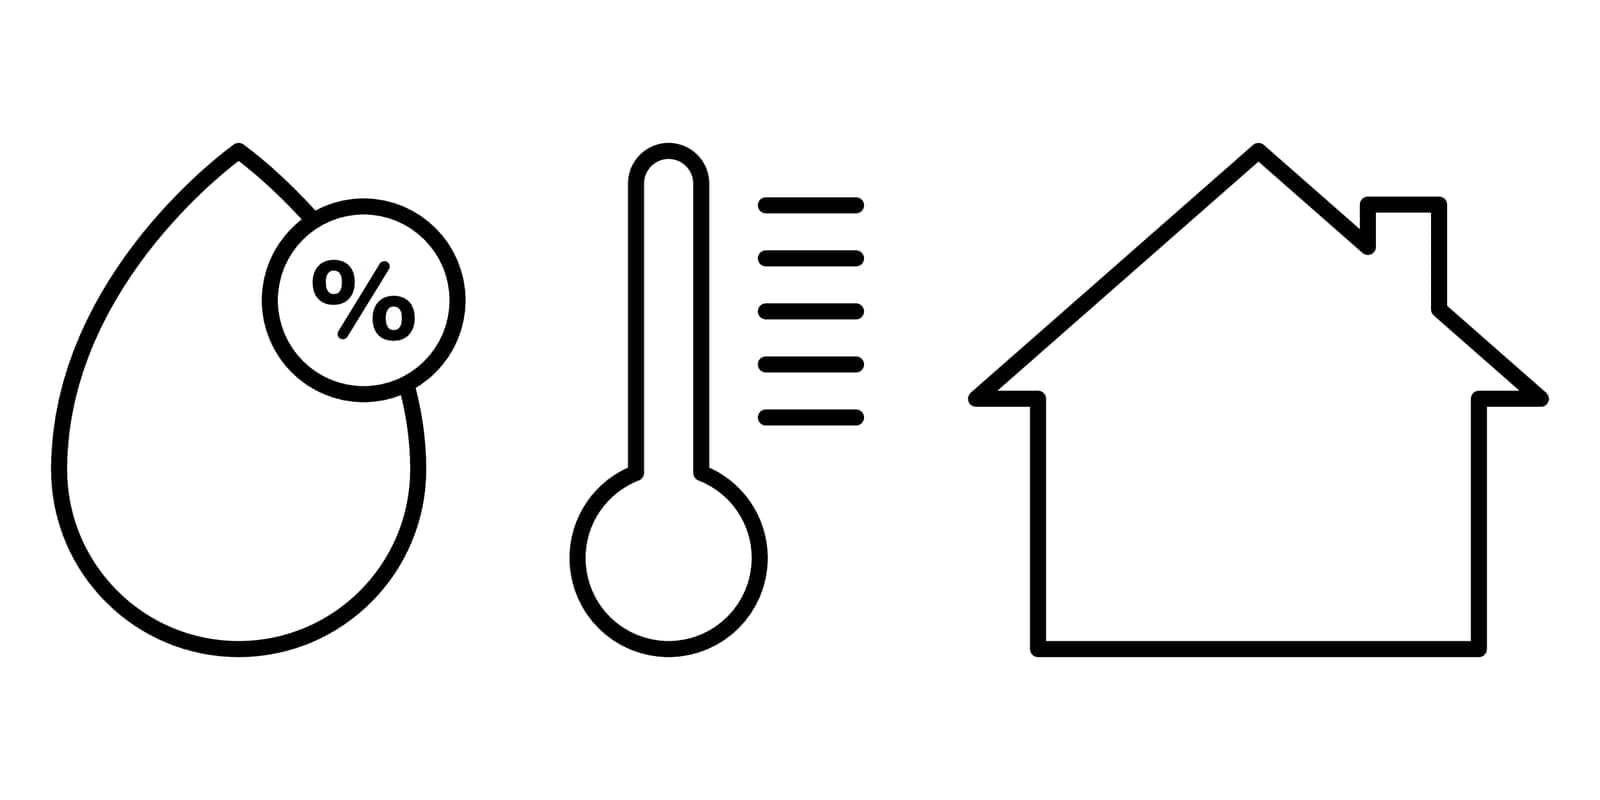 Temperature control house icon set by misteremil